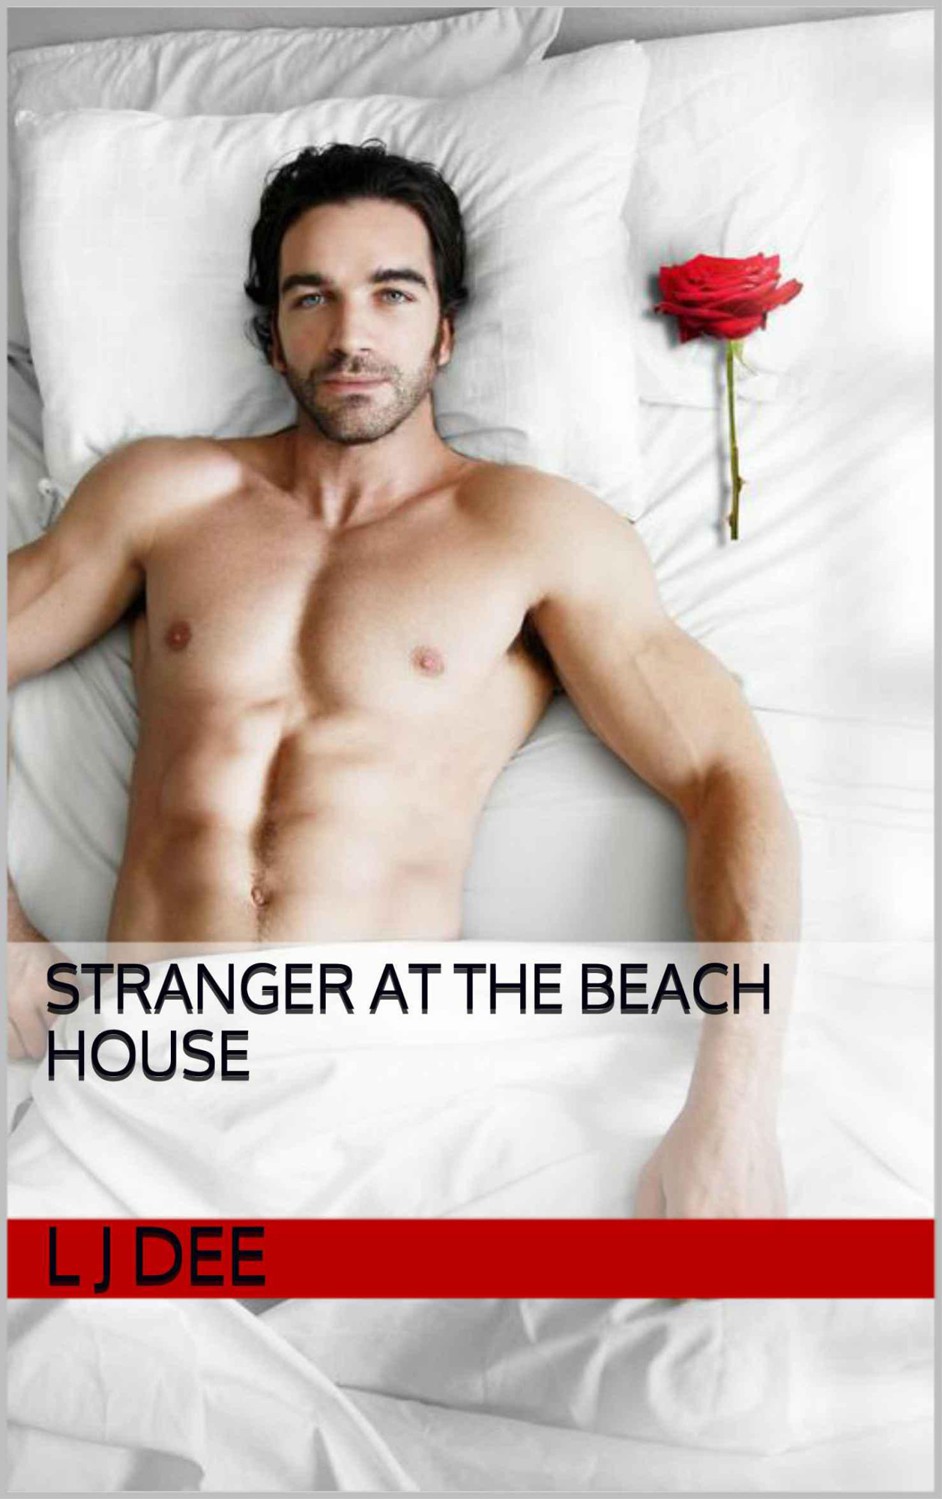 Stranger at the beach house by Dee, L J